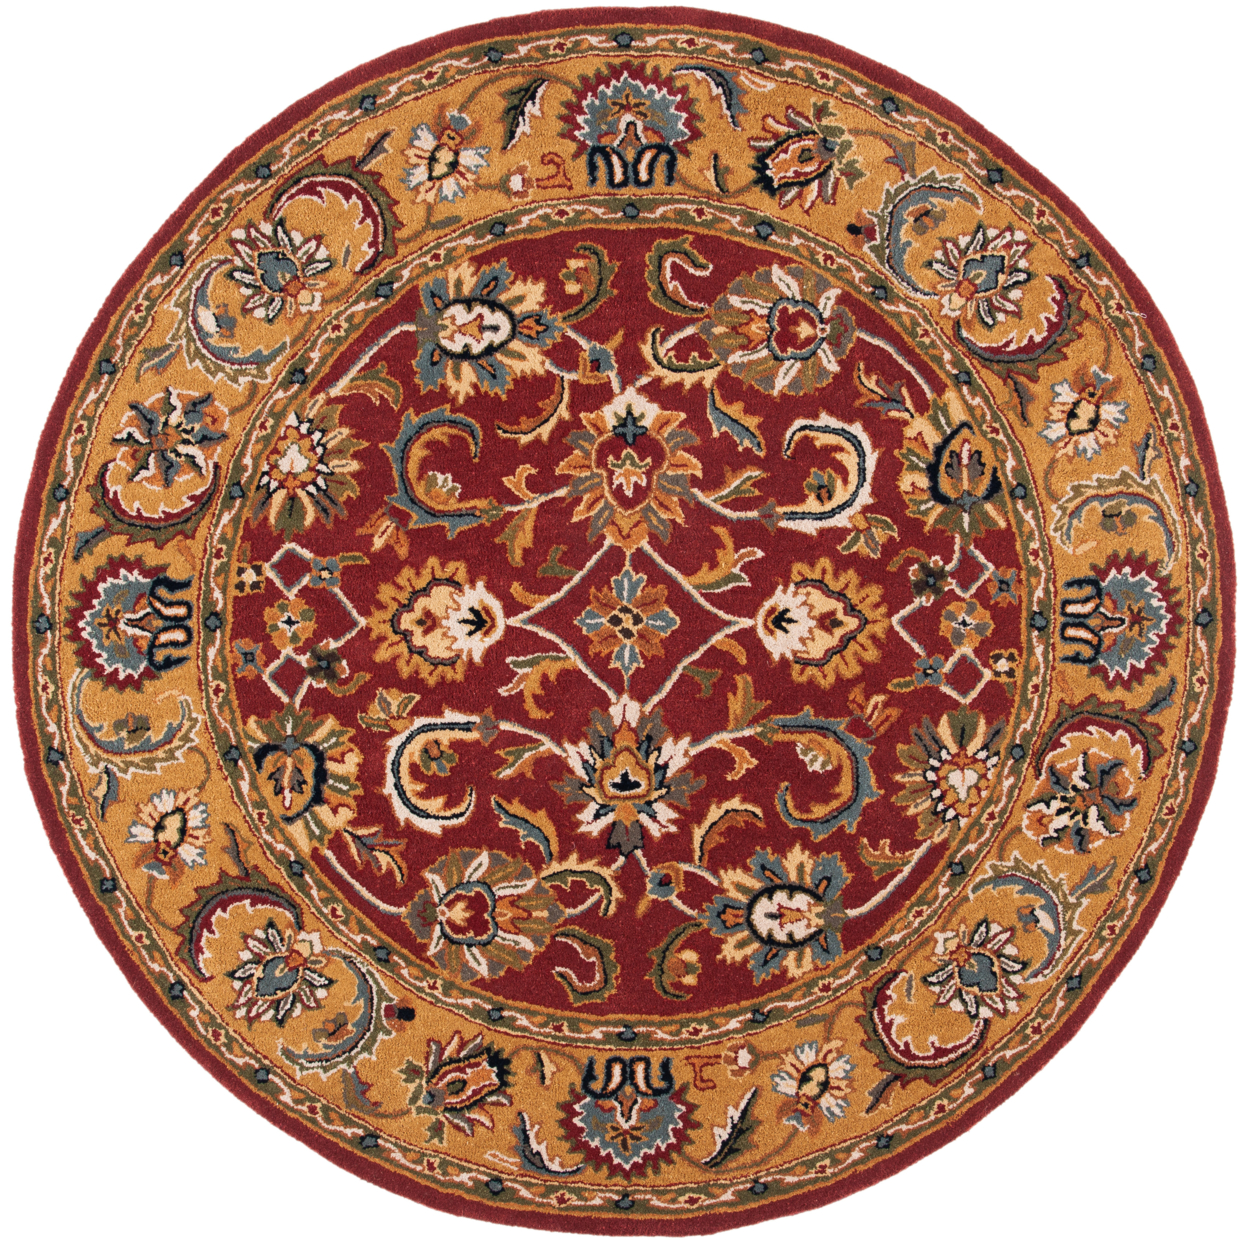 SAFAVIEH Classic Collection CL758C Handmade Red/Gold Rug - 6' Round